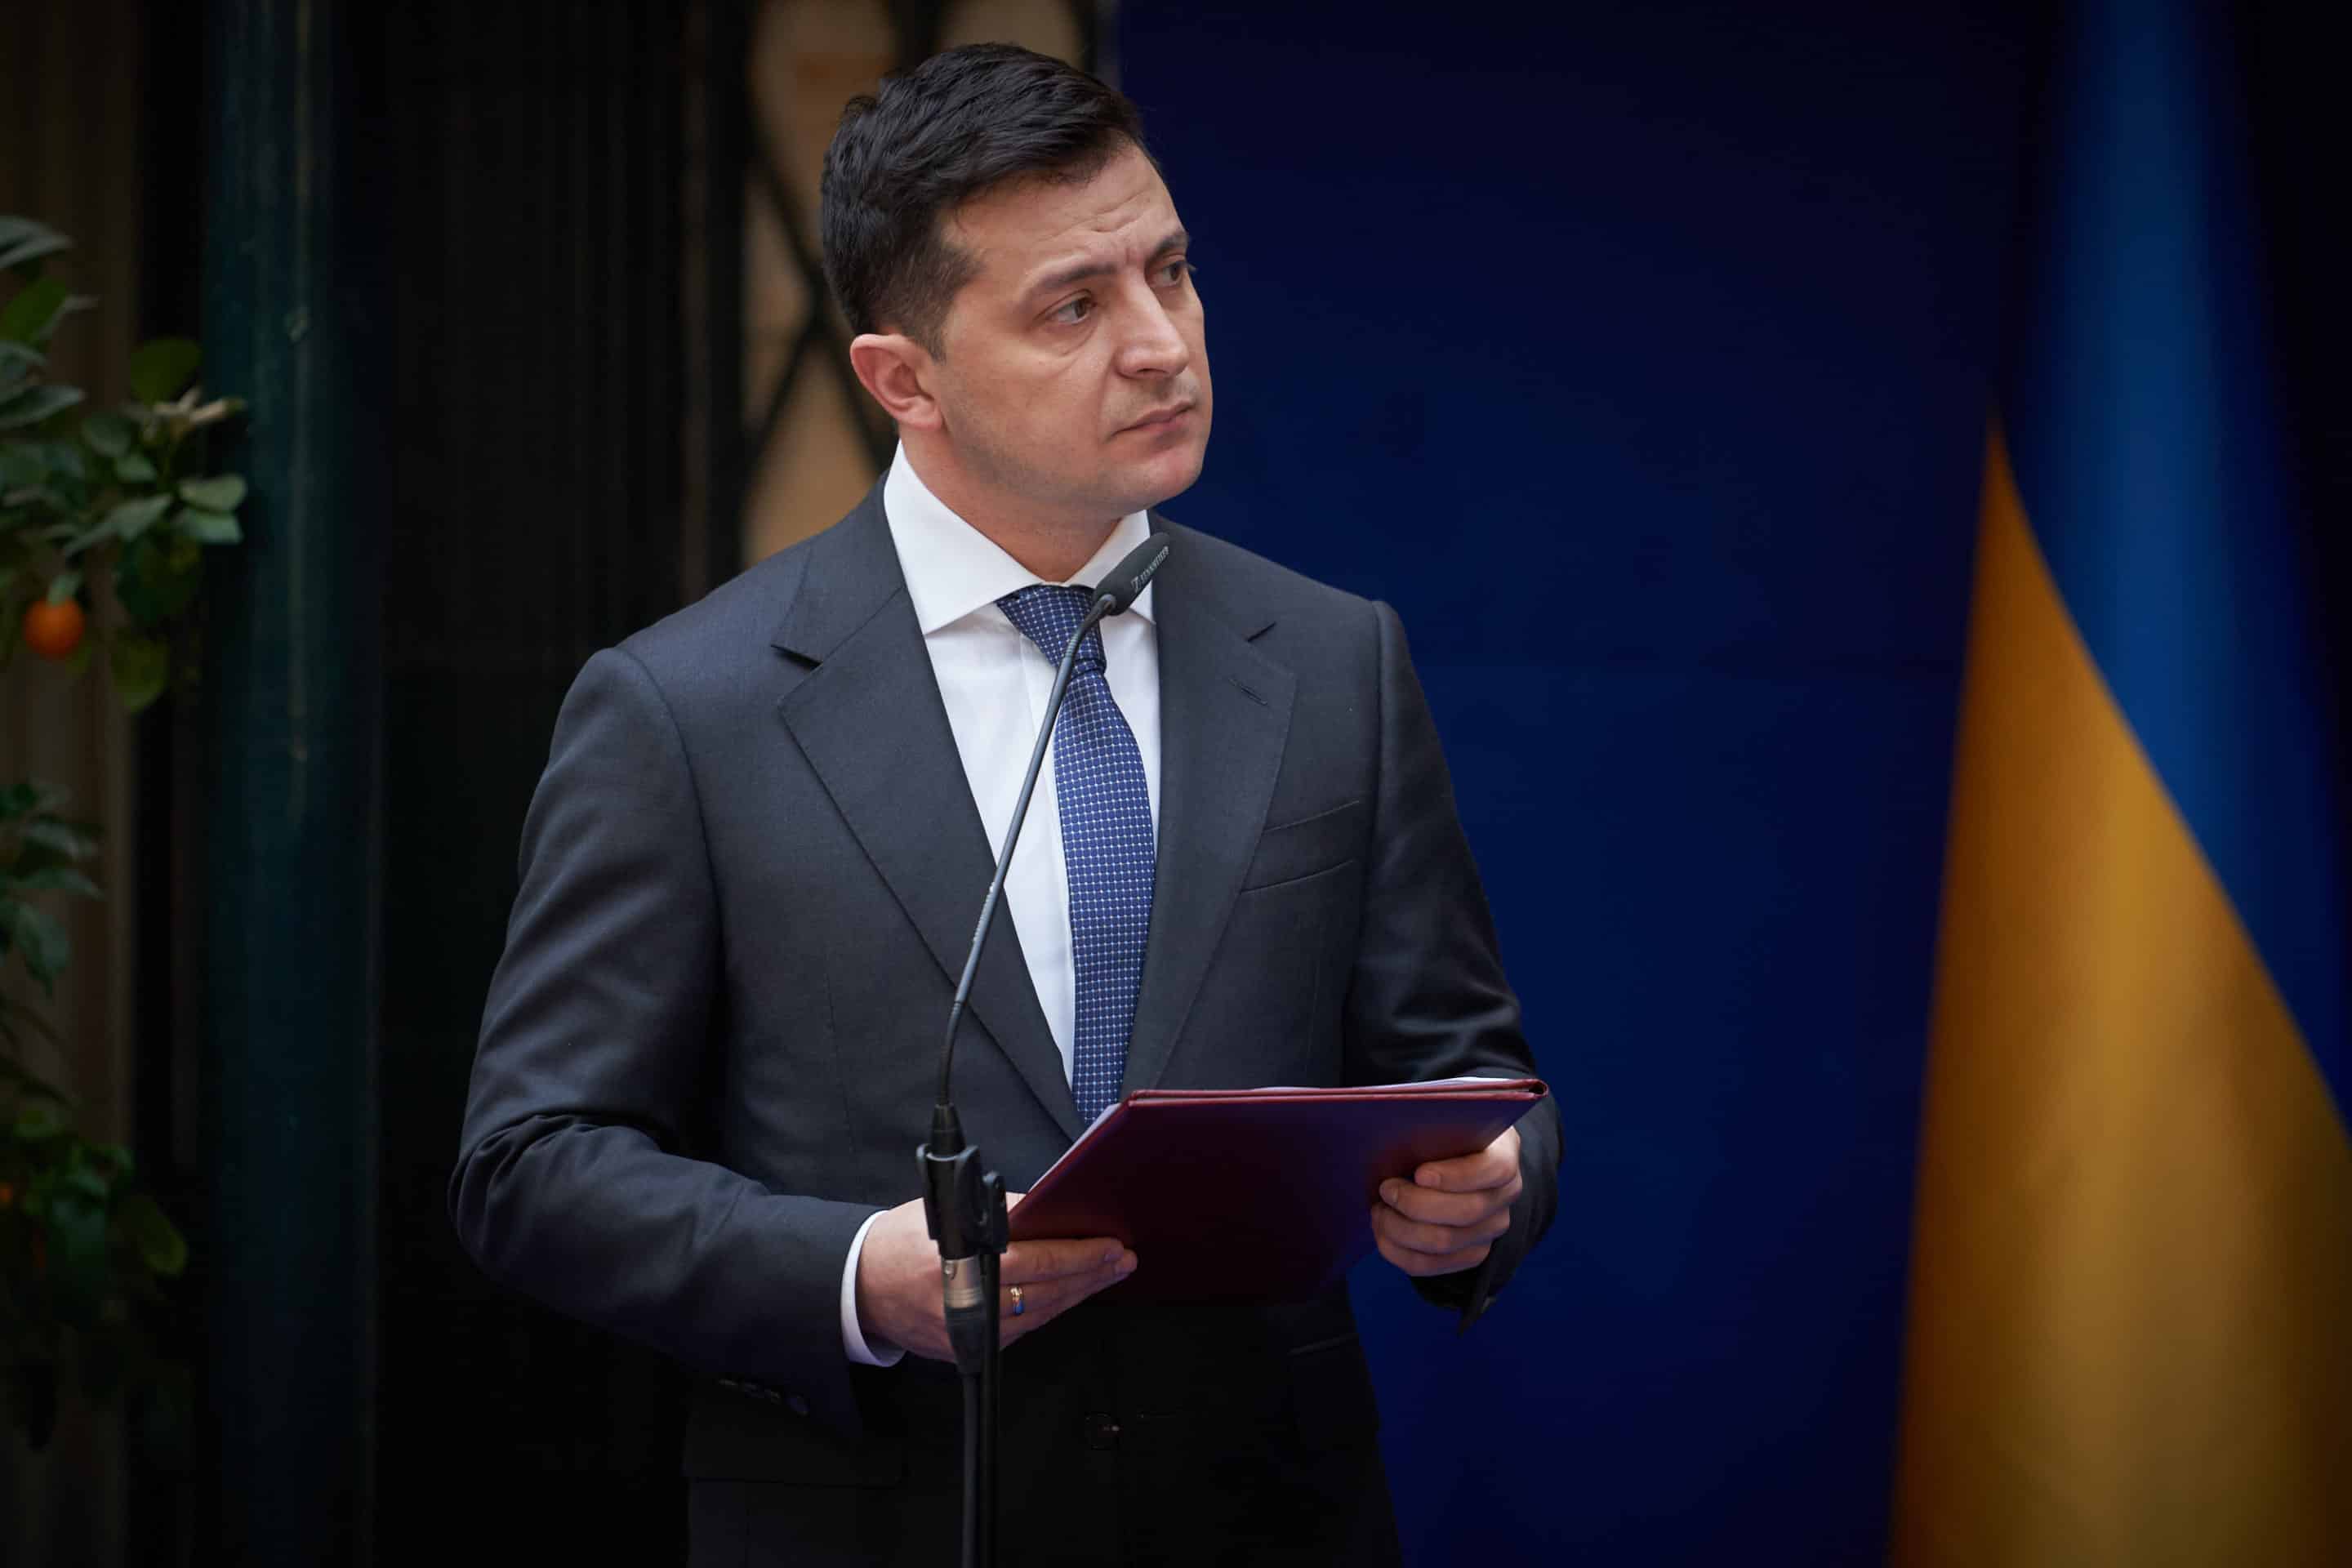 Zelensky Fires Top Ranking Defense Officials Ahead of His Trip to Washington